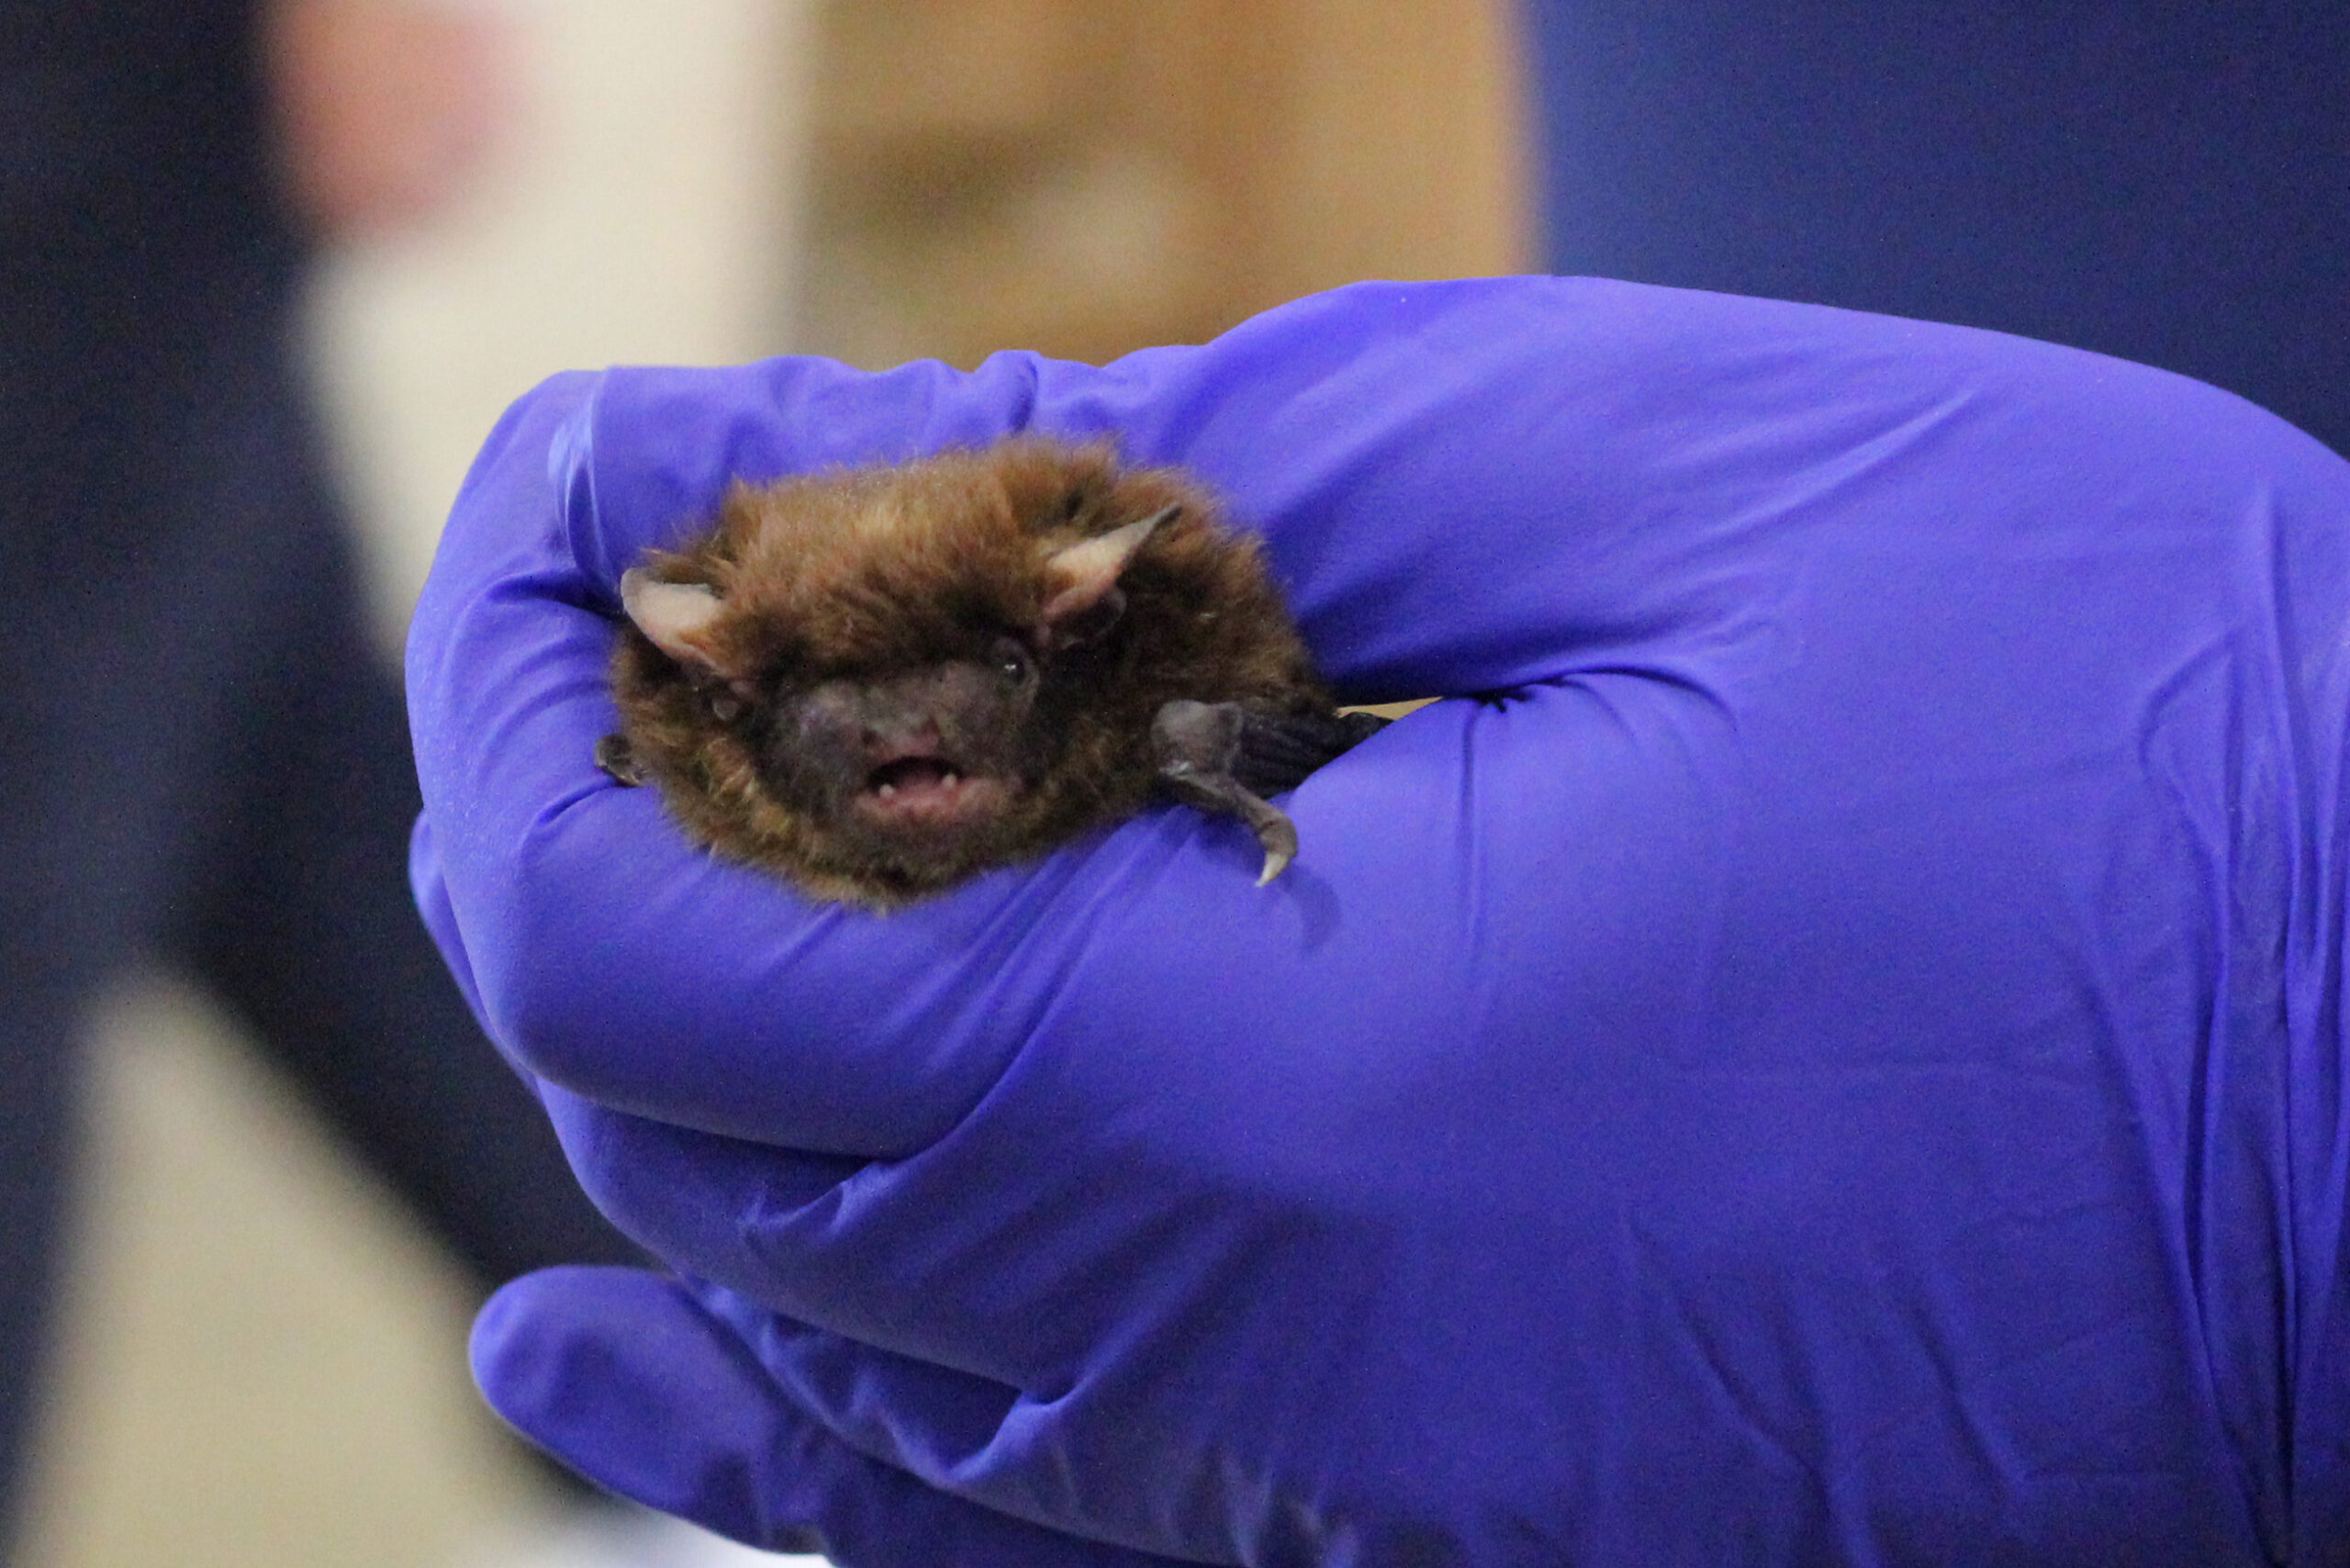 Why is professional bat Removal Company in great demand in Canada?